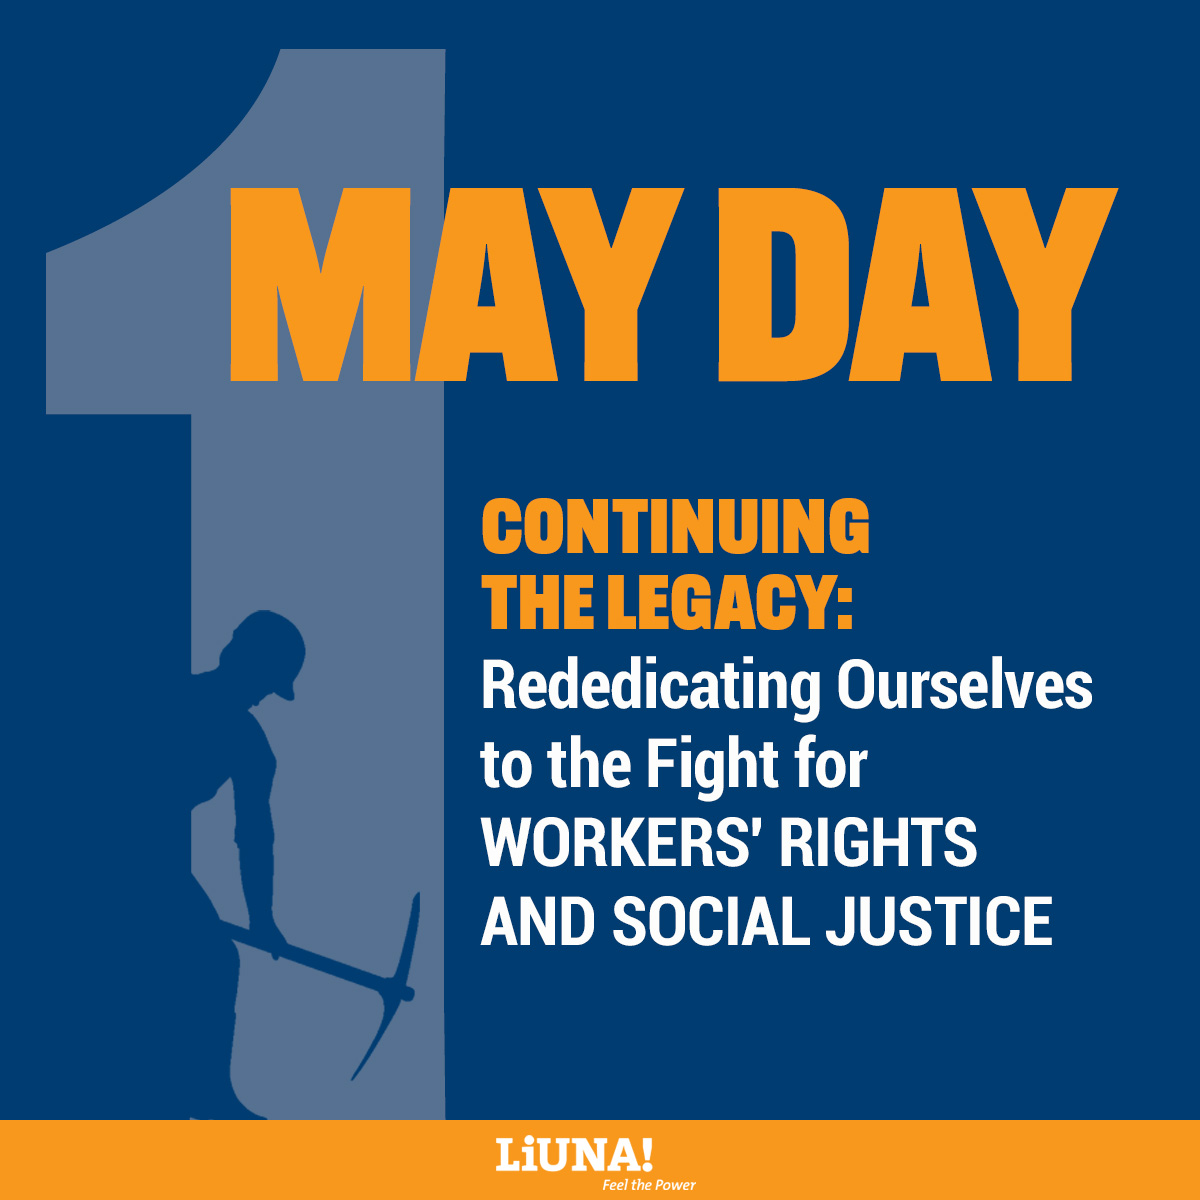 Today we celebrate the strength and resilience of workers everywhere. United, we stand strong. #SolidarityForever ✊

#LIUNA #LIUNABuilds #Solidarity #FeelThePower